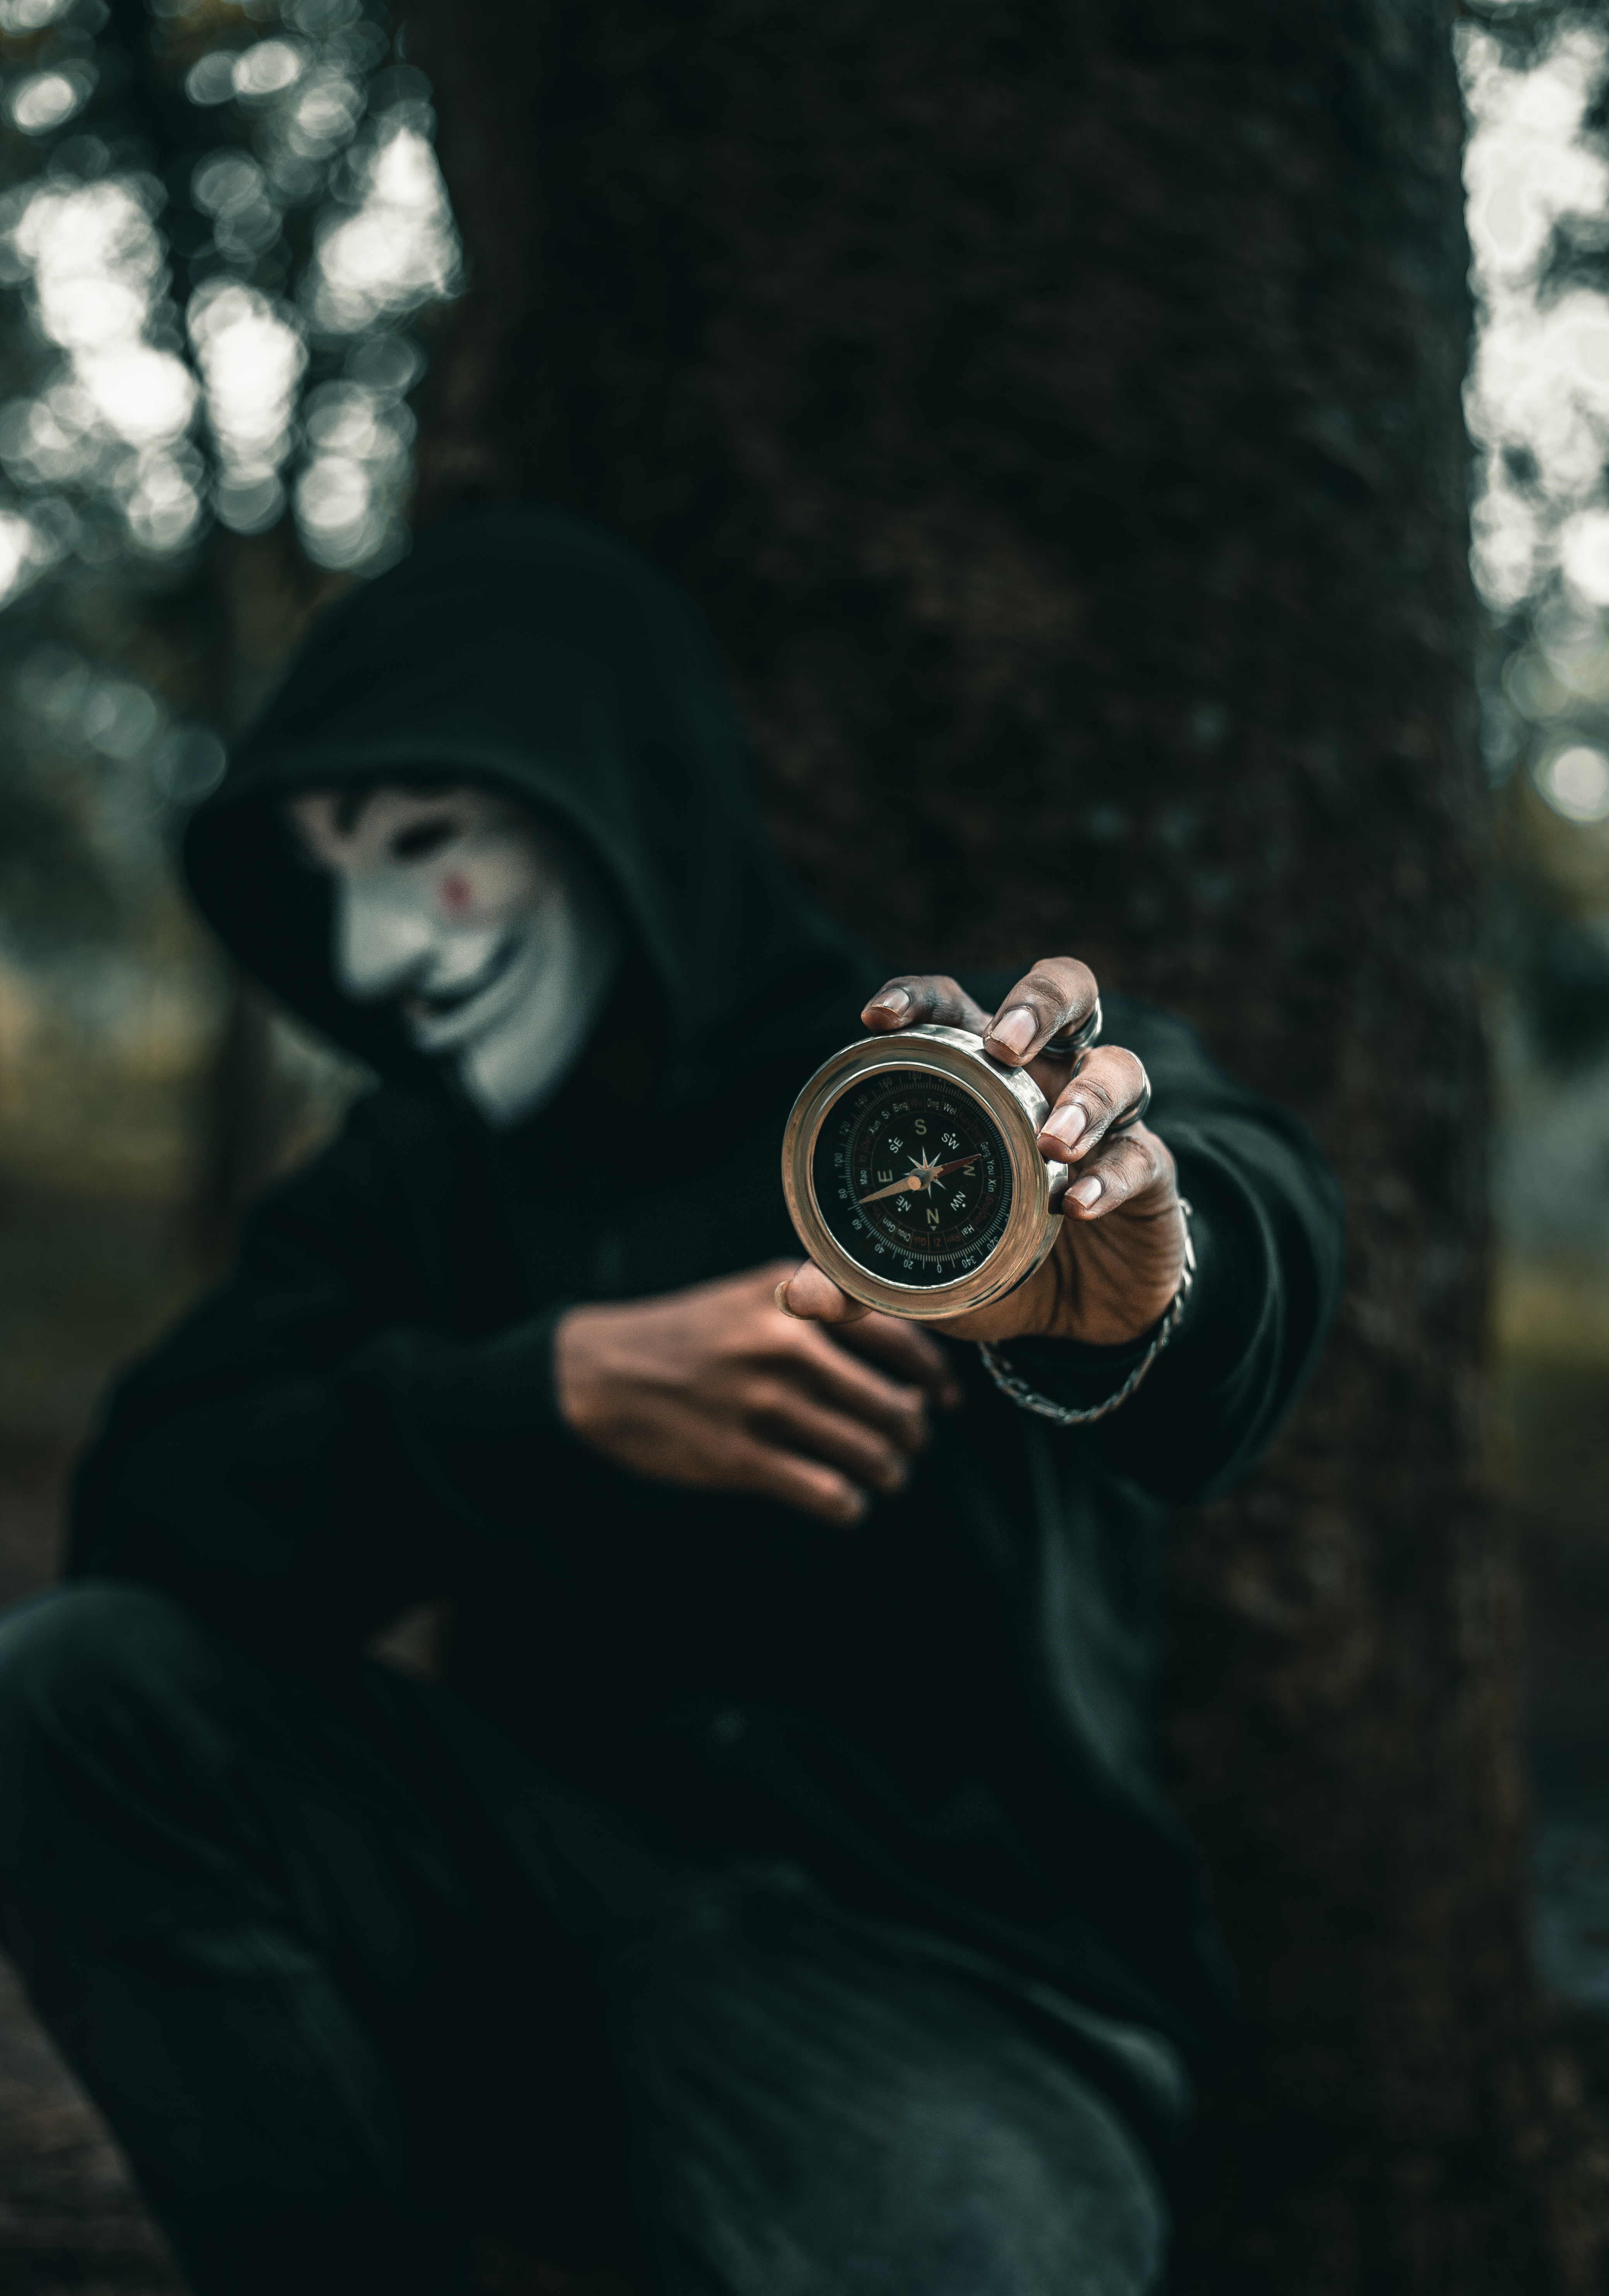 66909 Screensavers and Wallpapers Hood for phone. Download compass, anonymous, miscellanea, miscellaneous, mask, human, person, hood pictures for free